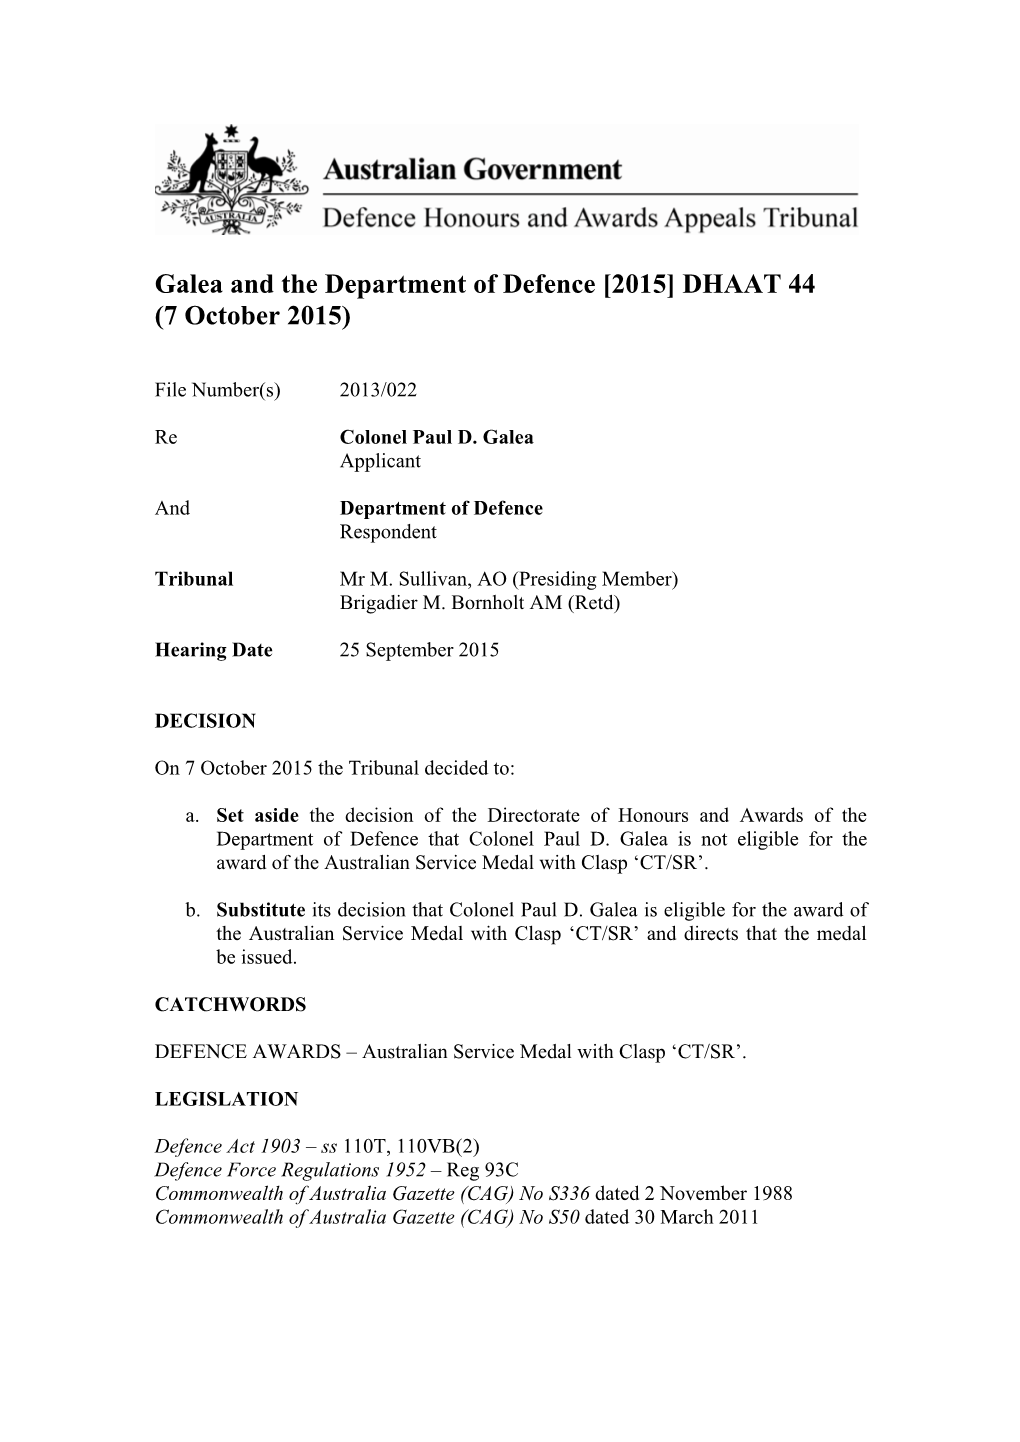 Galea and the Department of Defence [2015] DHAAT 44 (7 October 2015)